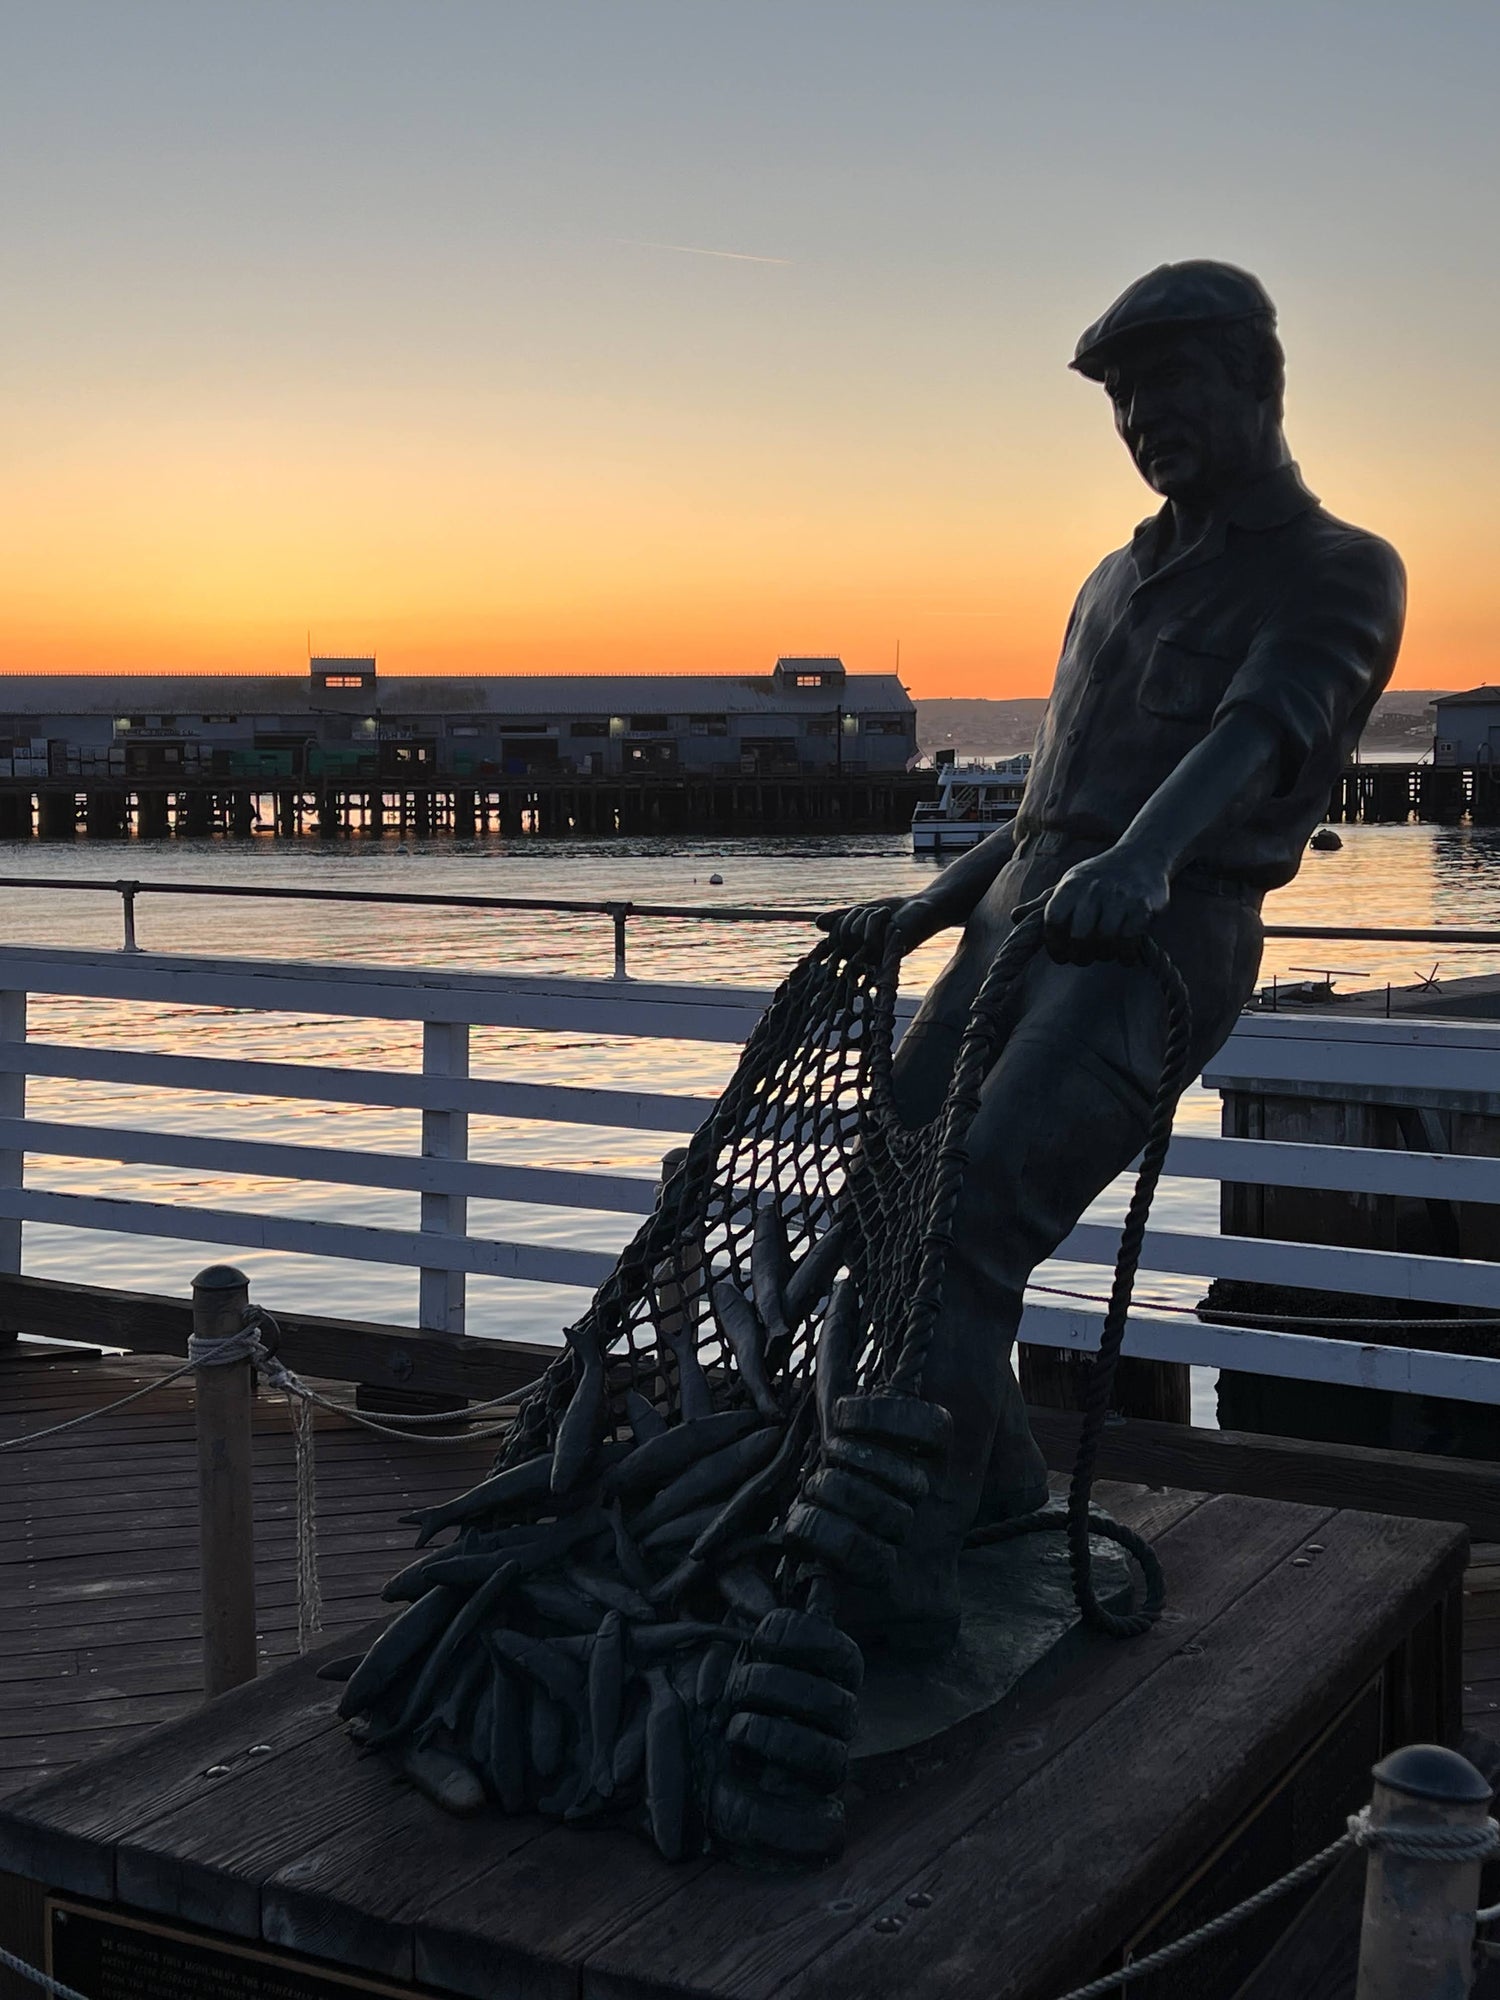 A fisherman's statue at the wharf in Monterey at sunrise with another pier in the background.